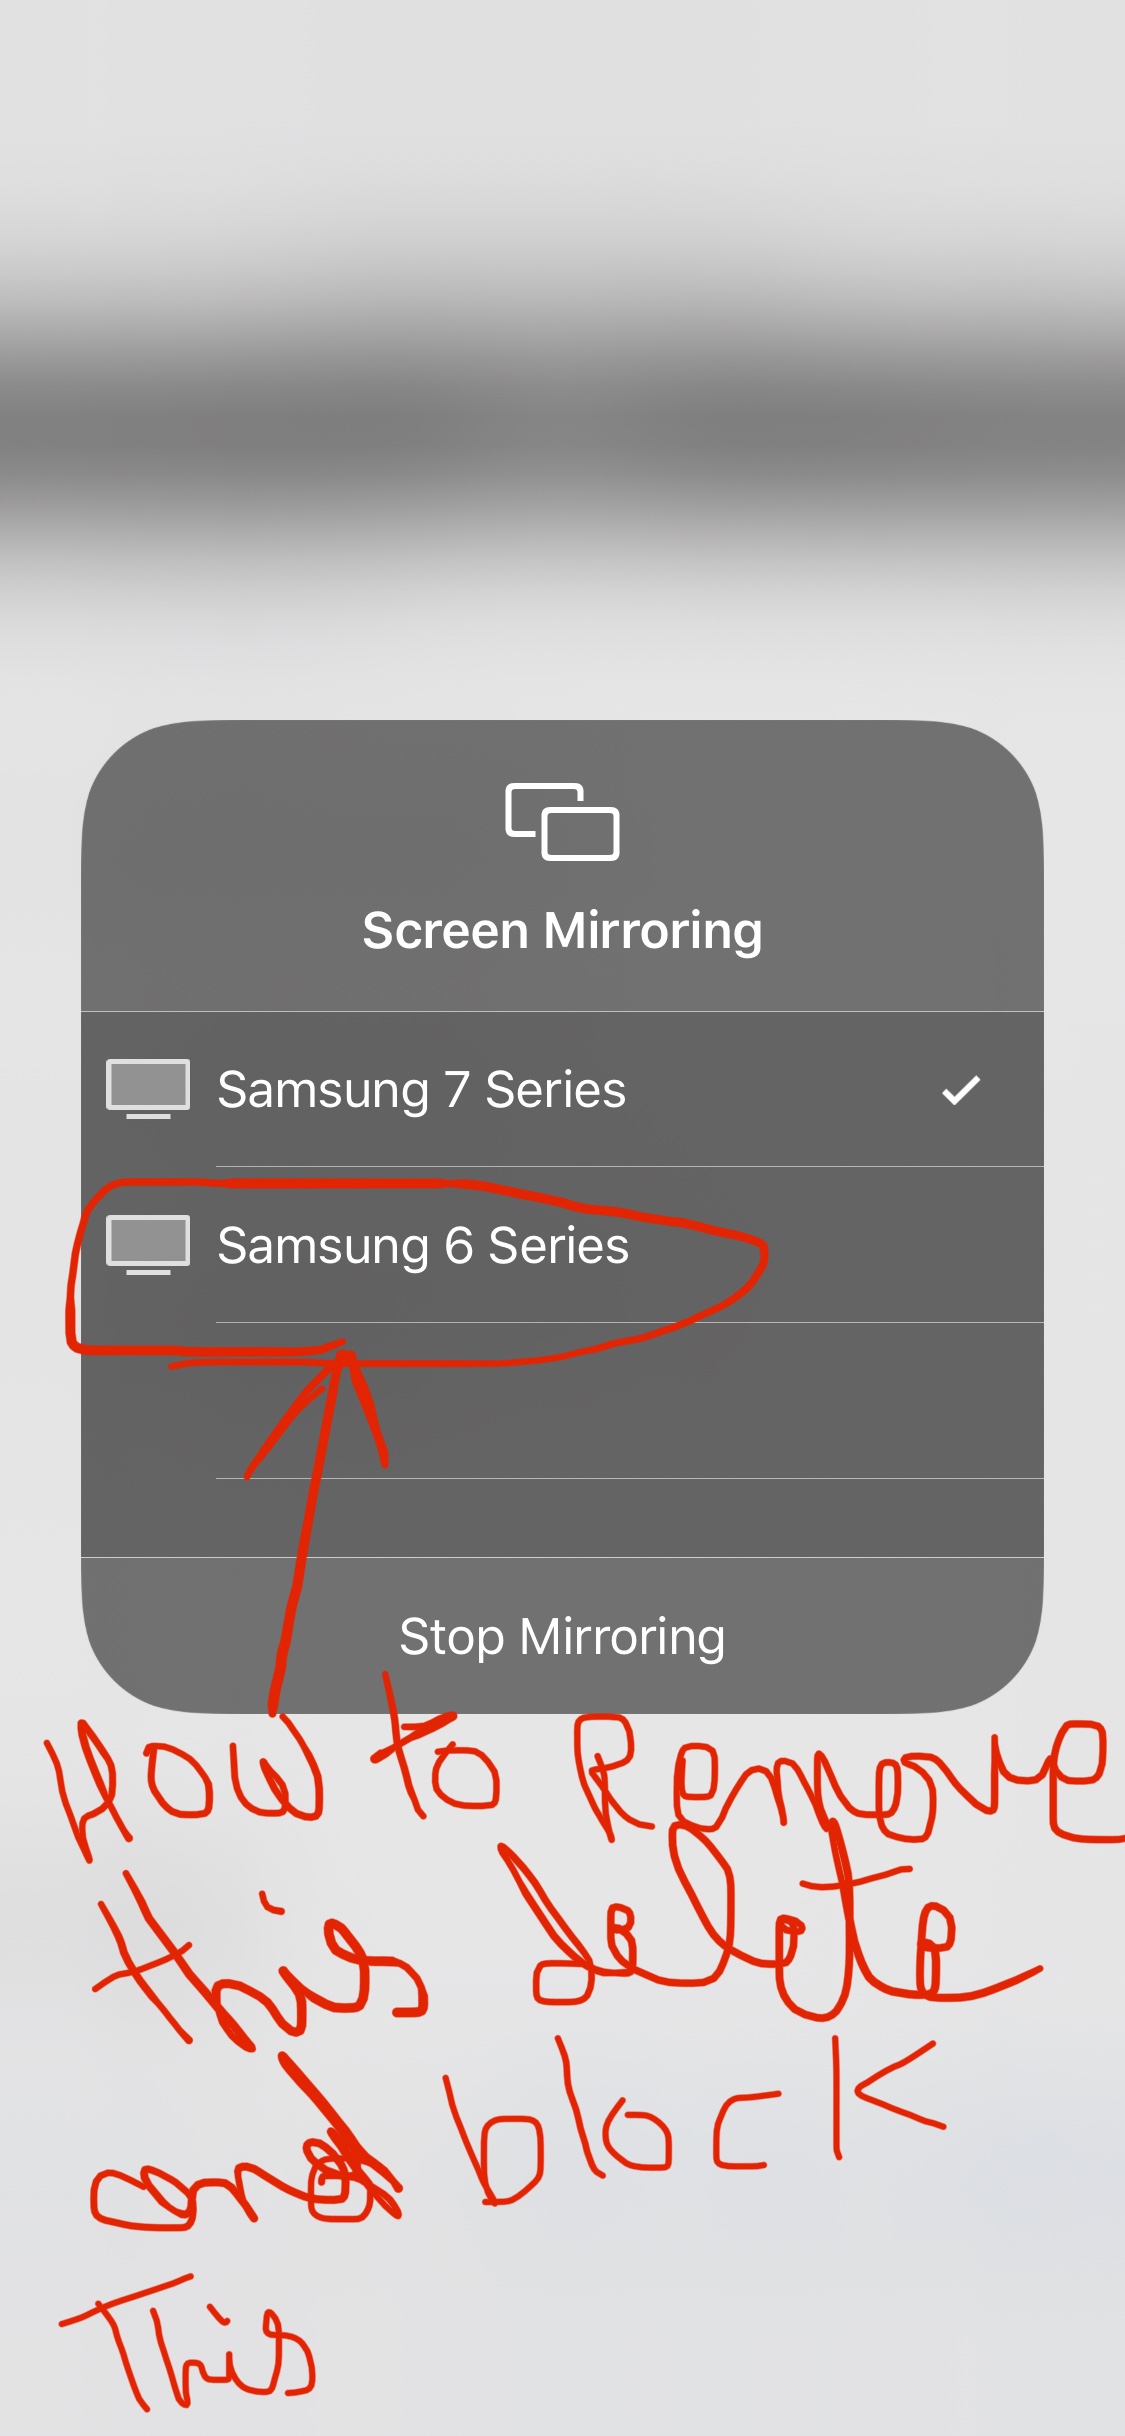 How To Remove Samsung Tv From Iphone, How To Screen Mirror Iphone Samsung Tv 6 Series